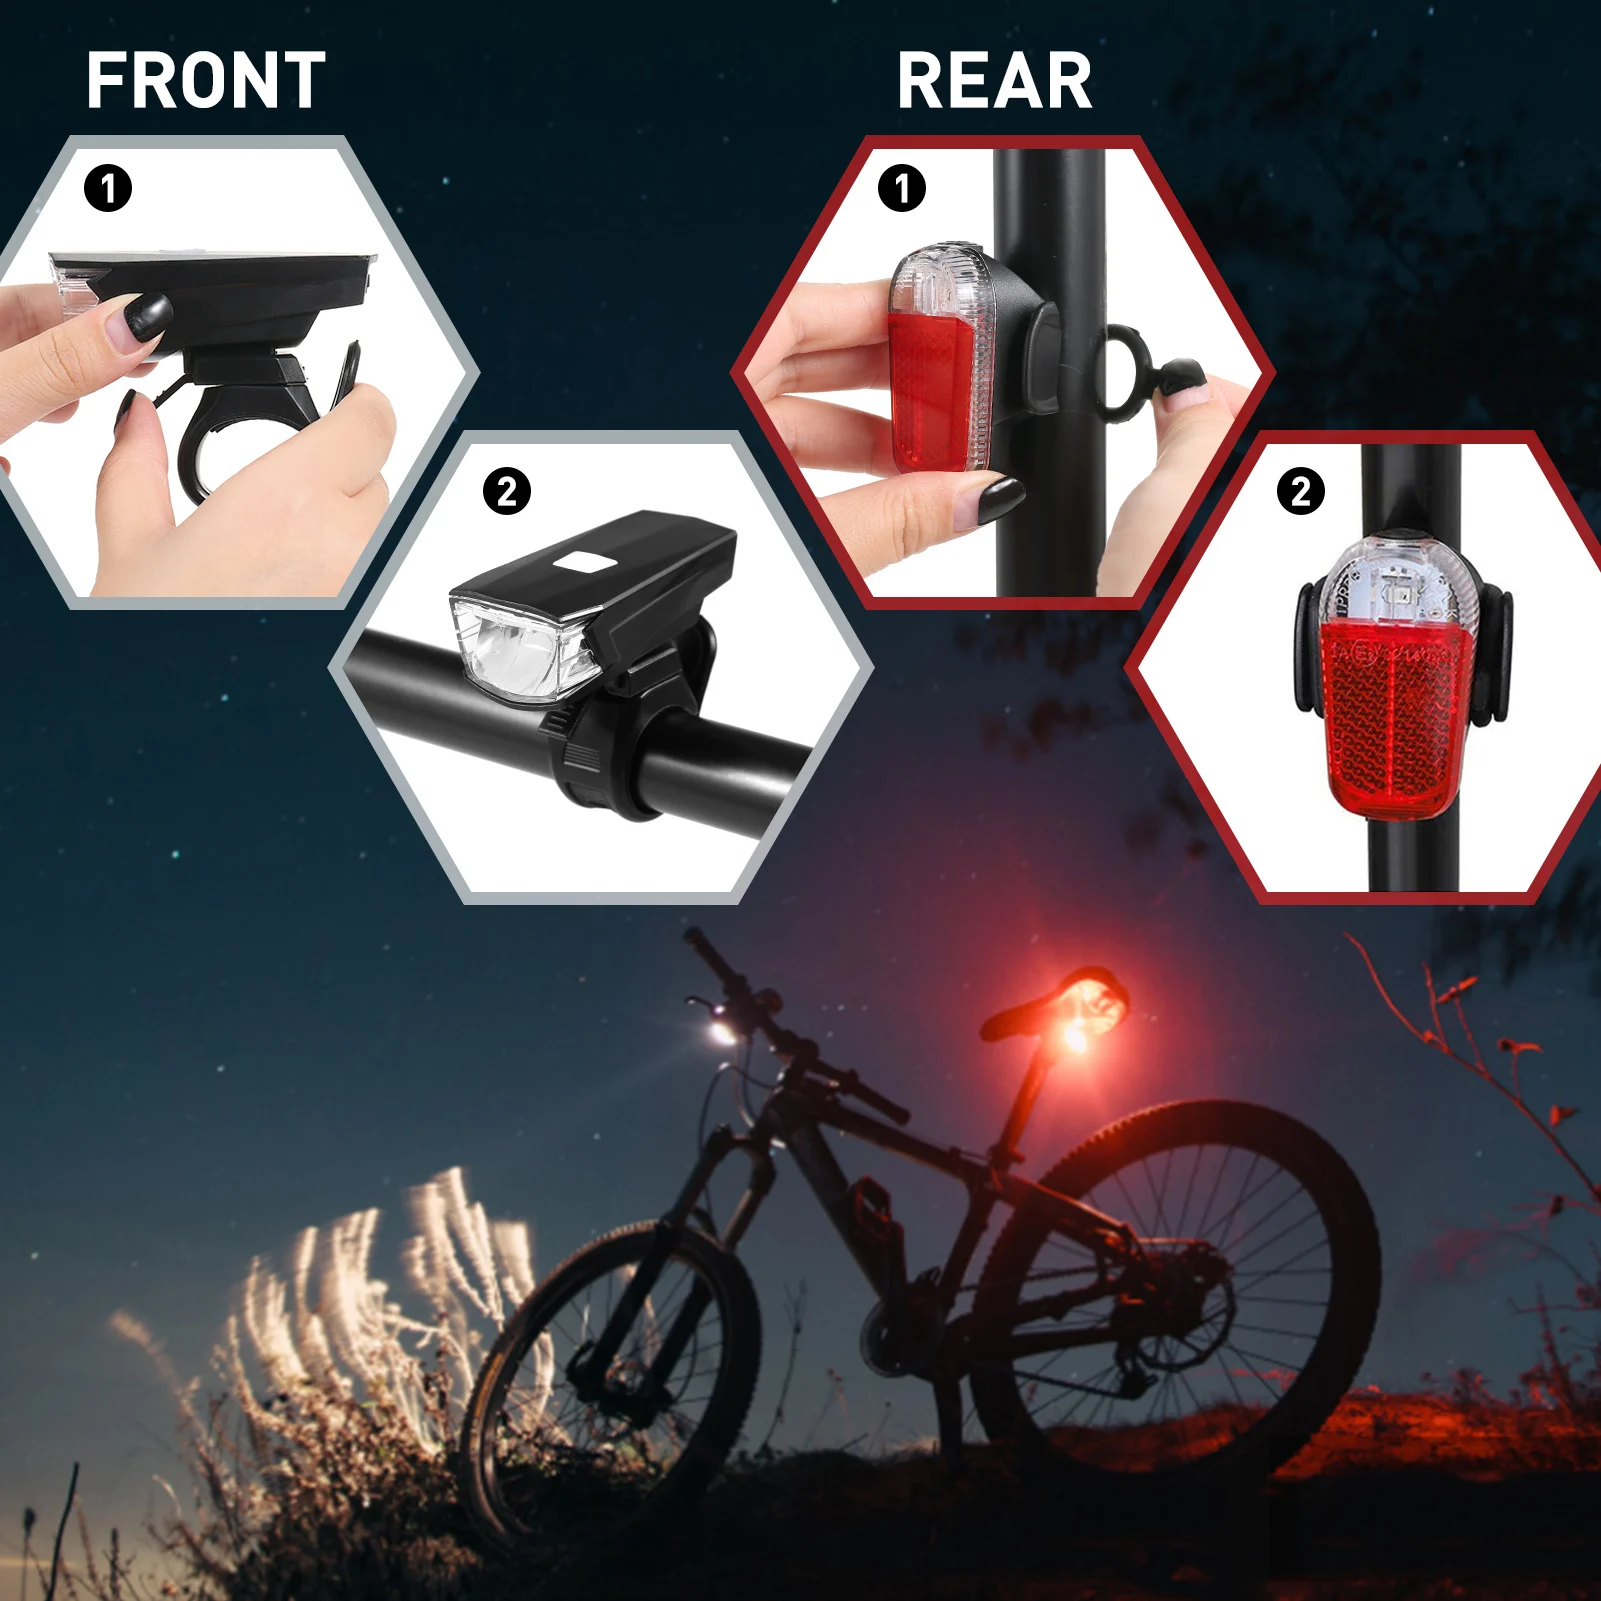 Road Bike Bell Night Rider USB Rechargeable LED Front Flashing Bike Flashlight Safty Waterproof with Free Tail Lights Cycling for Mountain Bike Baulody Bike Light Rear Bicycle Warning Lamp Black 